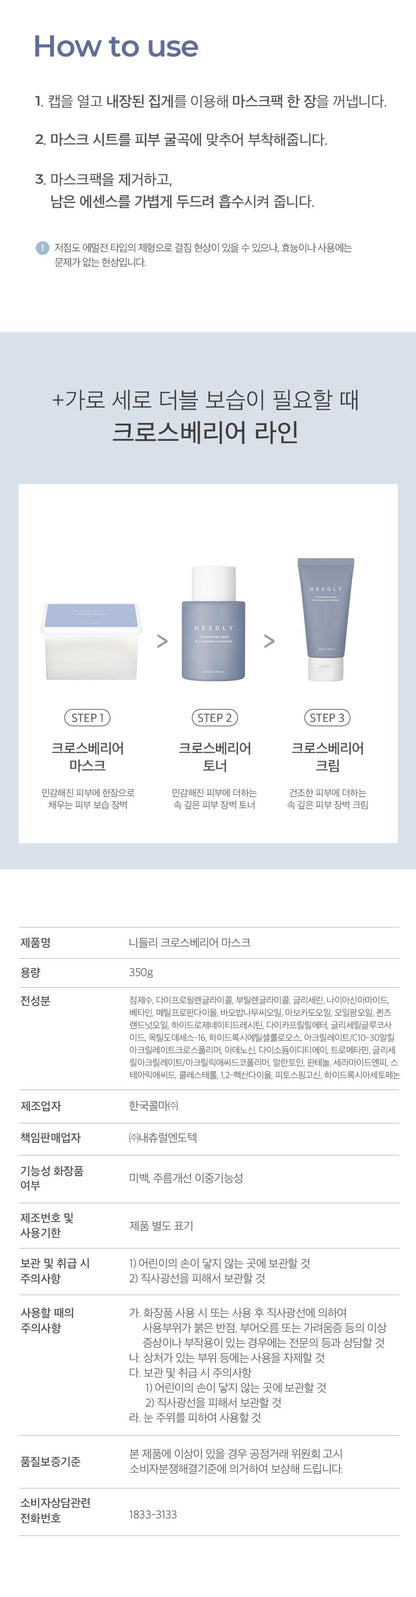 [Needly] Crossbarrier Mask 30 sheets